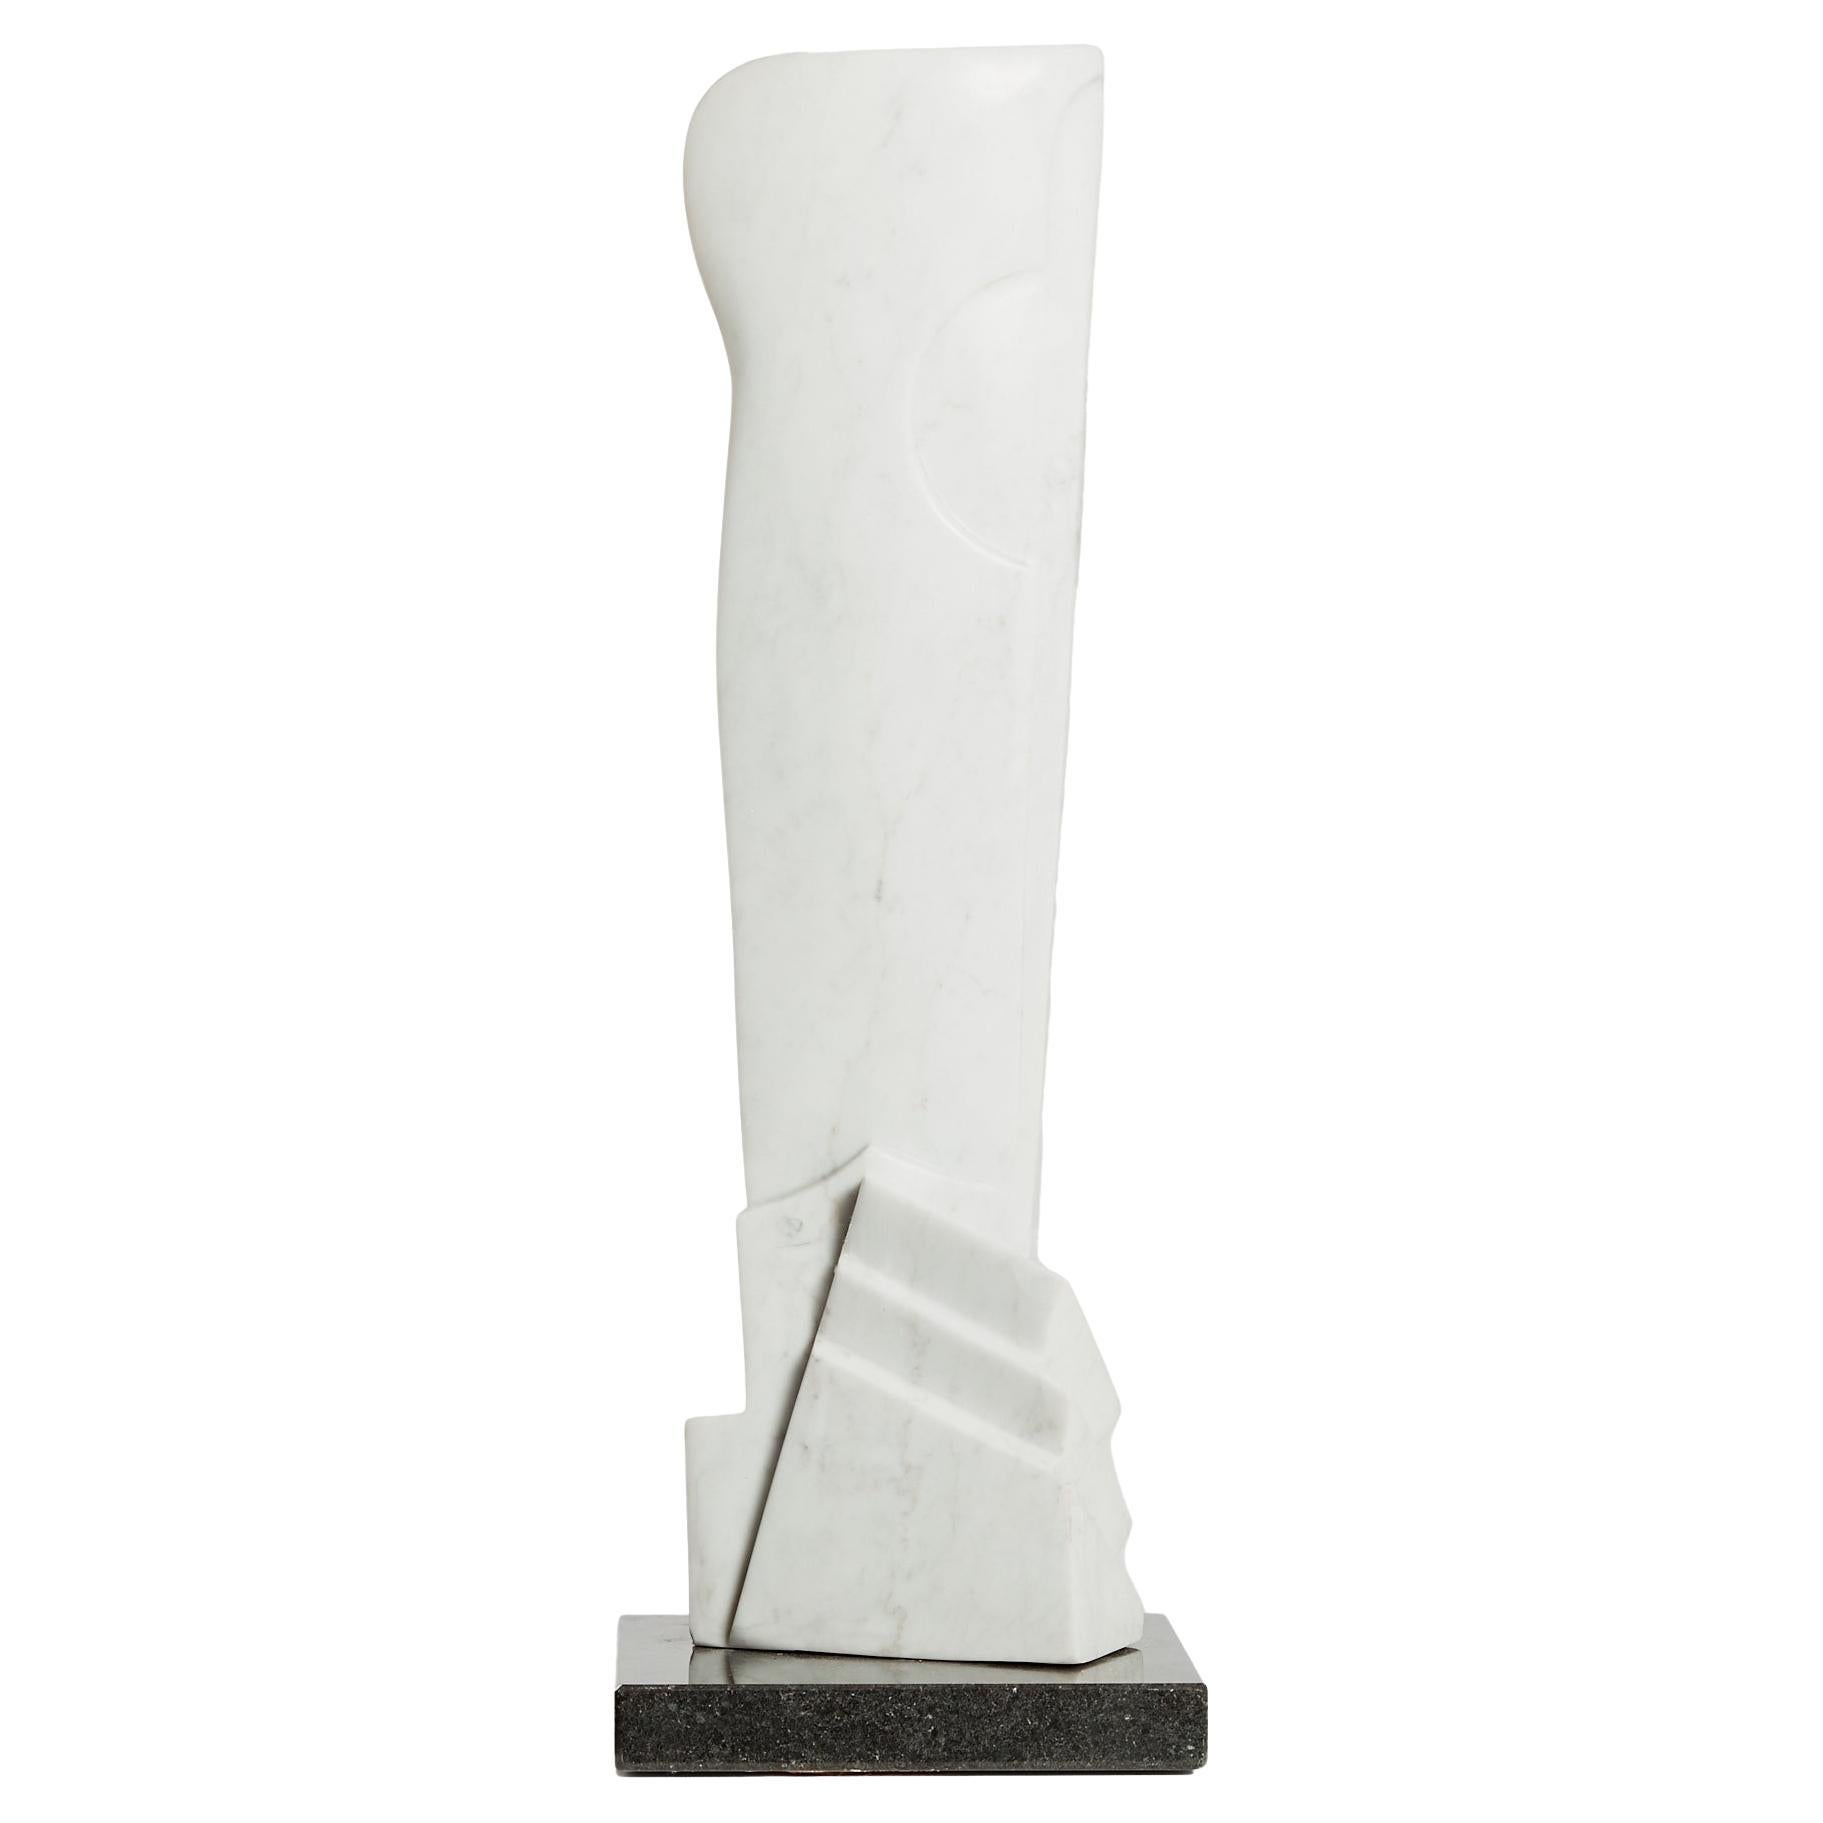 Vorticist Abstract Marble Sculpture on Granite Base